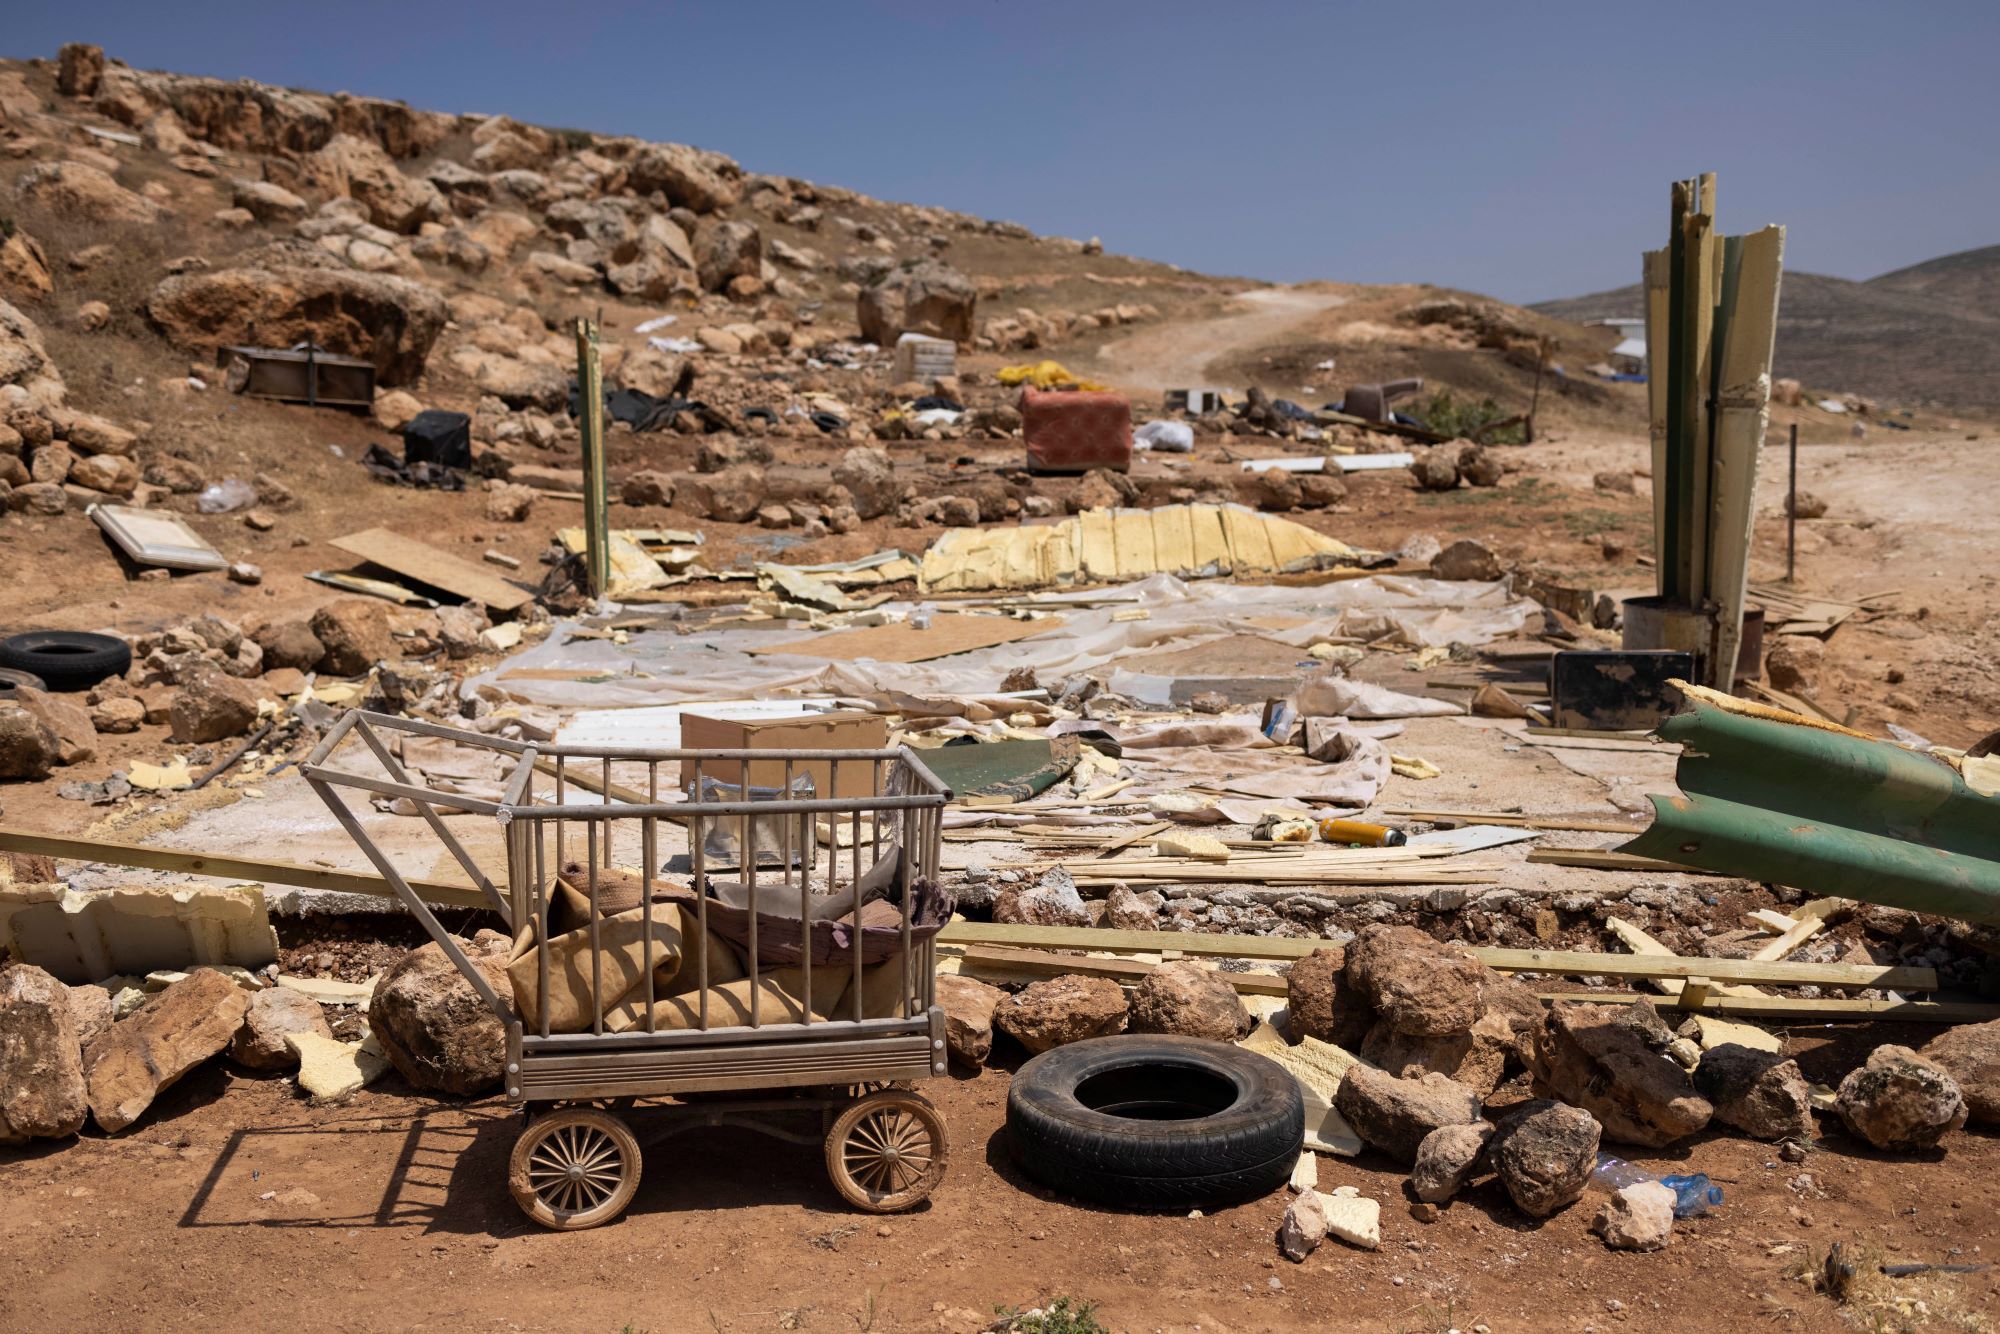 The belongings and remains of homes of Palestinian families in Ein Samia, West Bank. (Oren Ziv)